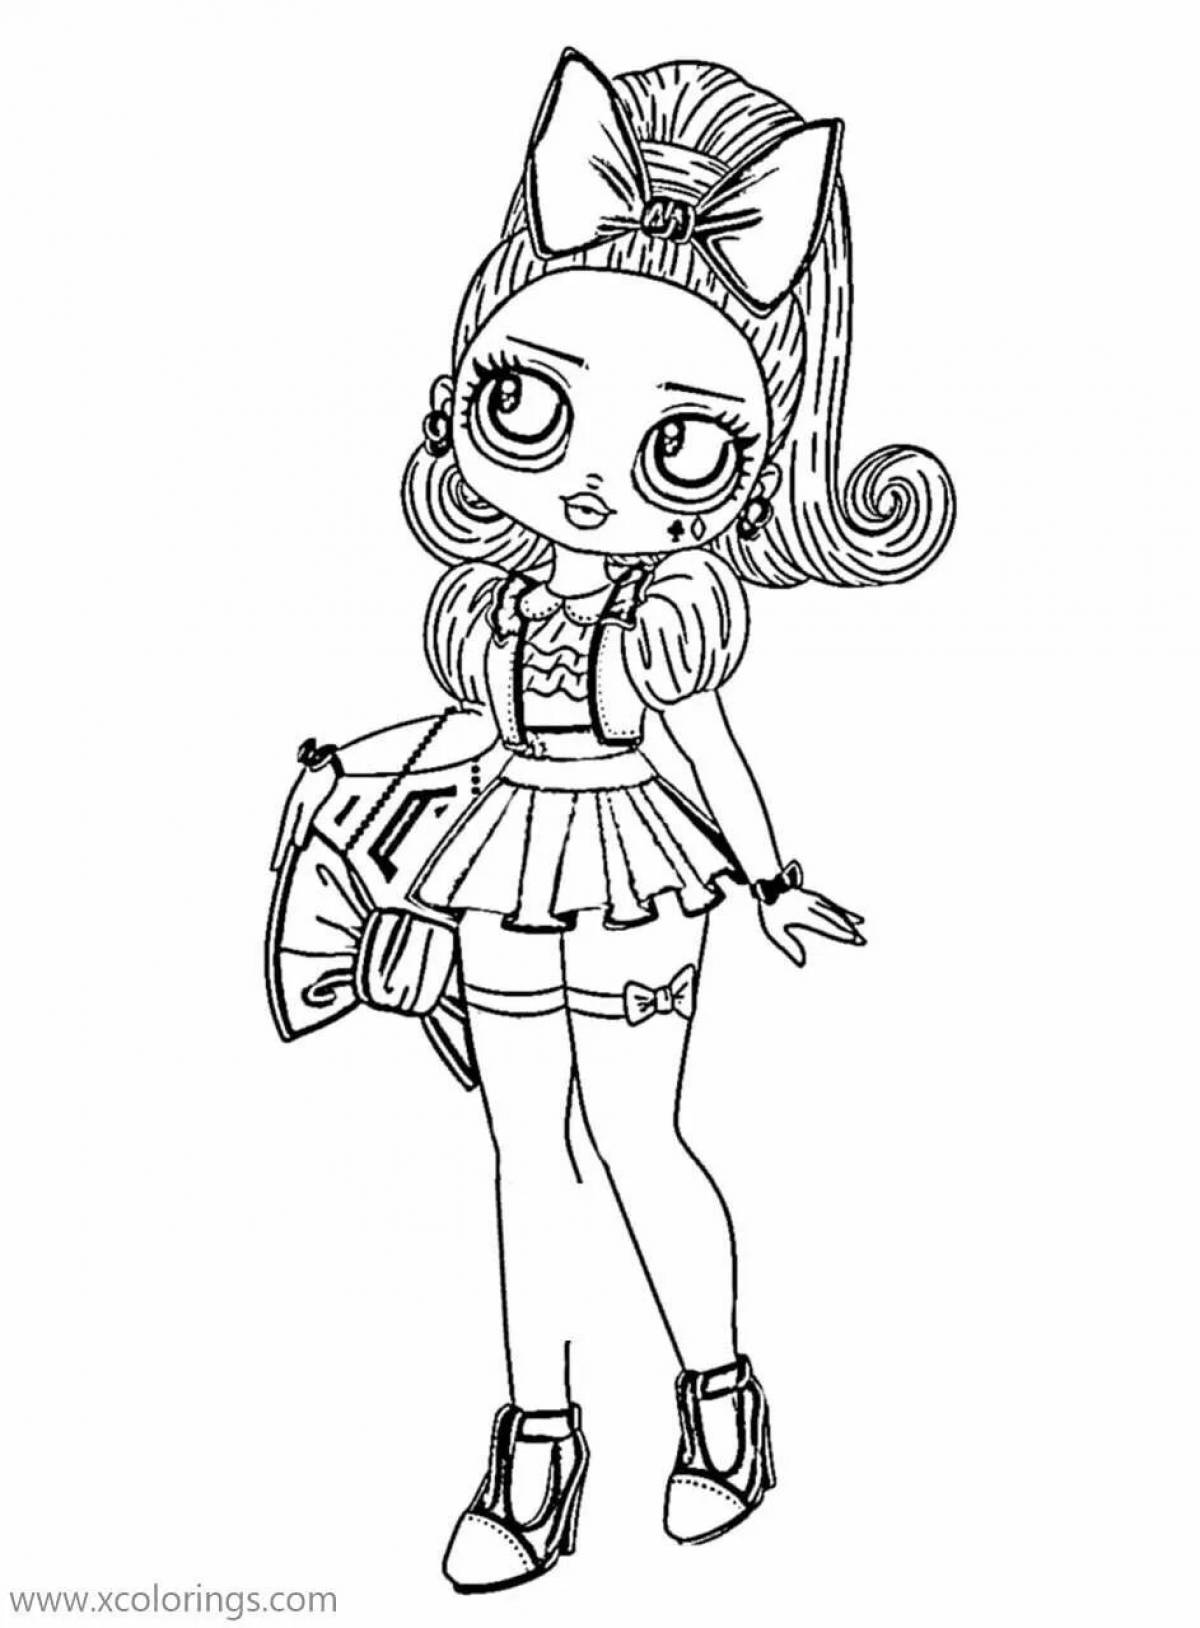 Glitter cave club doll coloring book